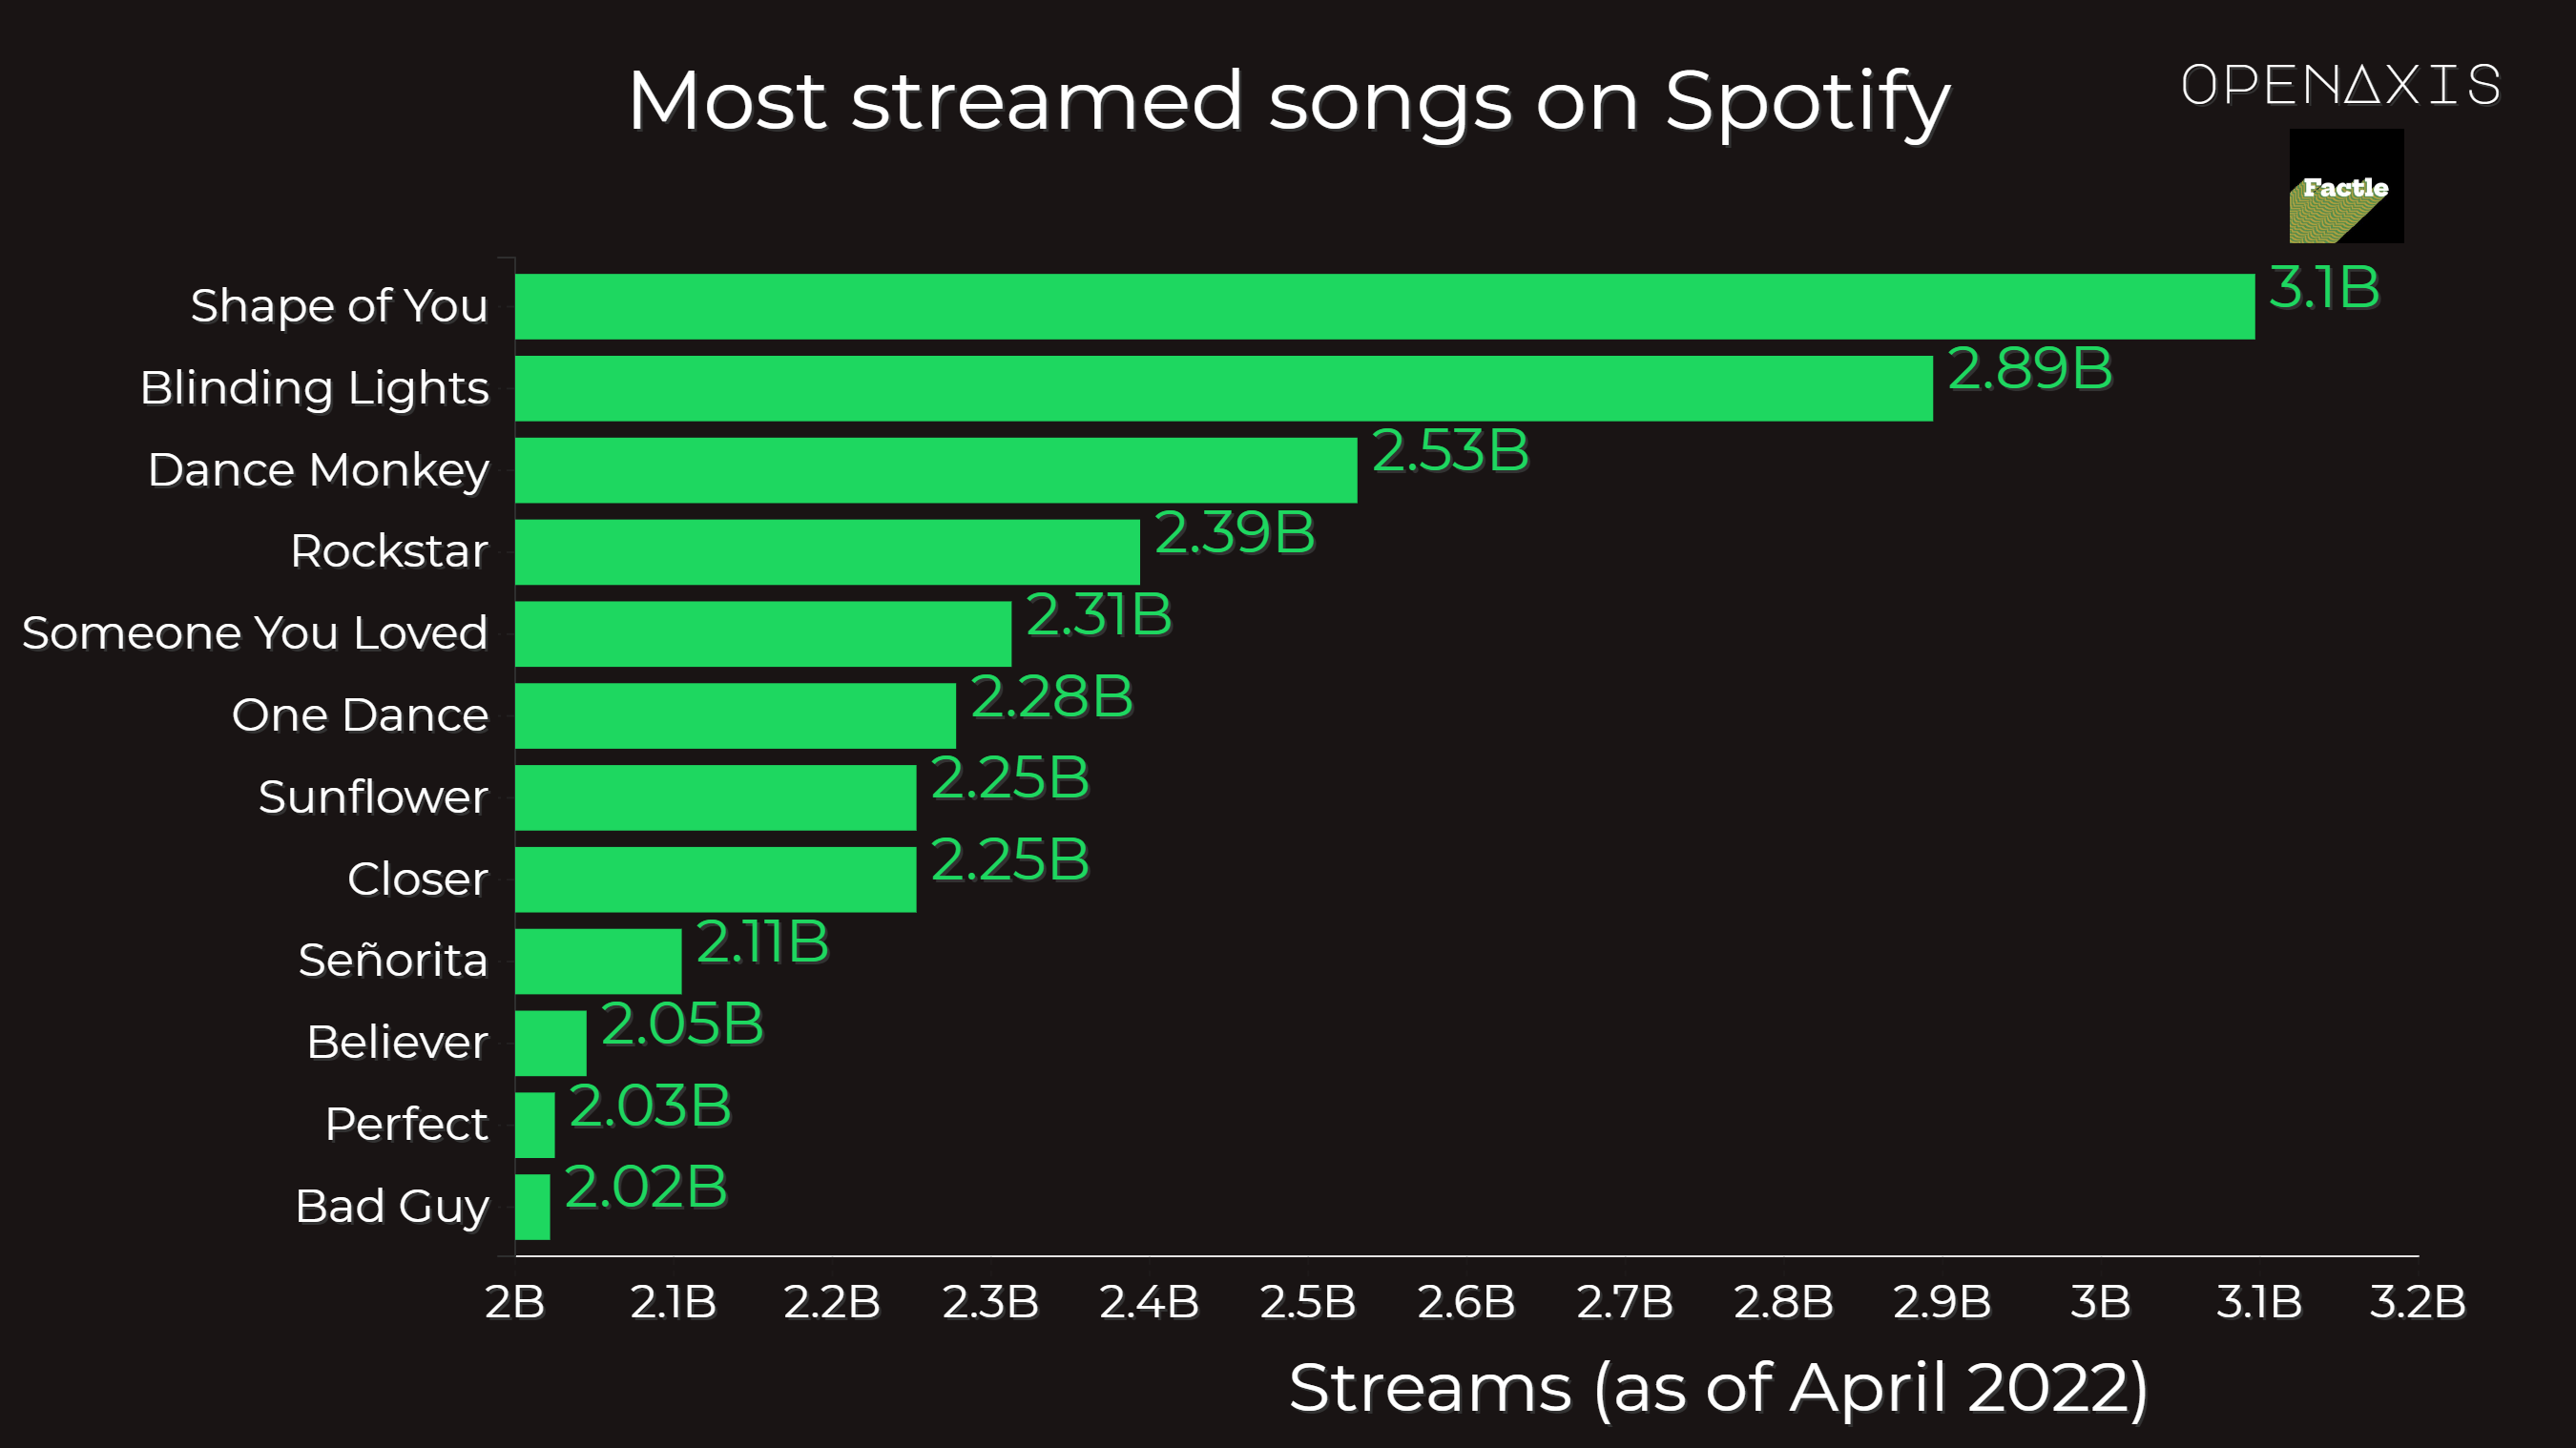 "Most streamed songs on Spotify"